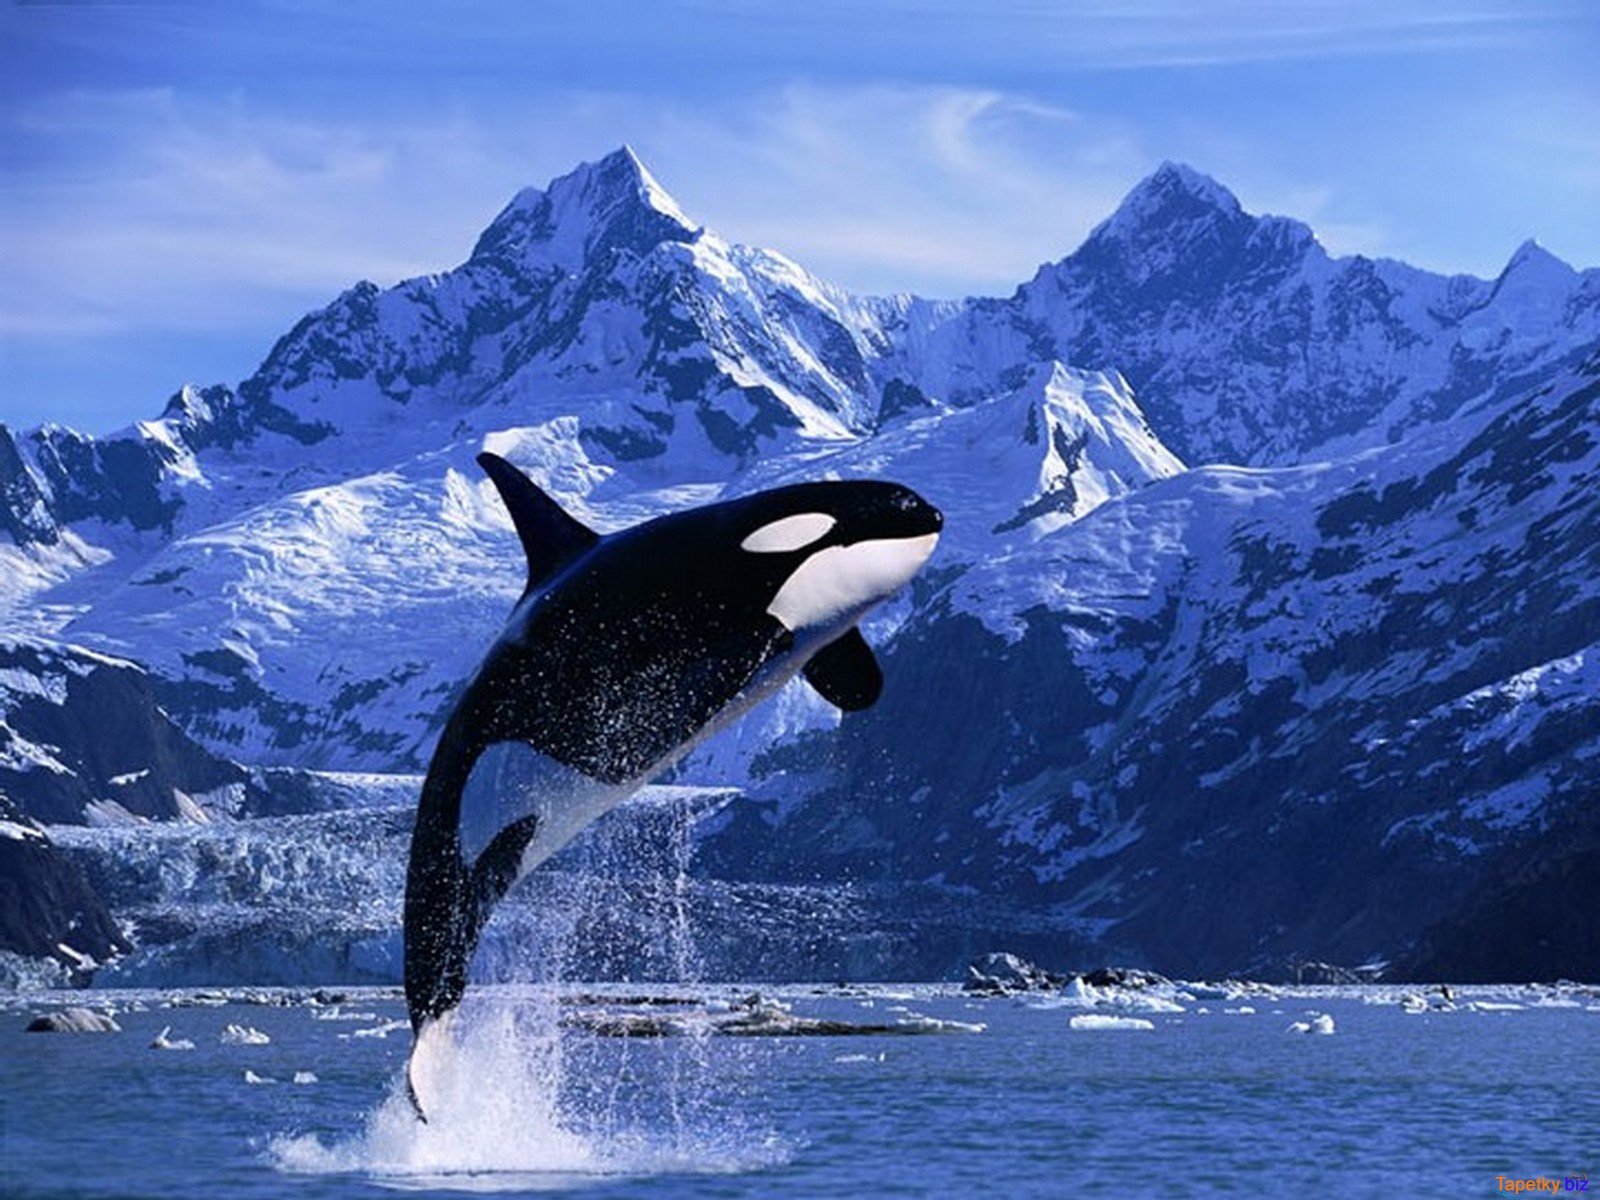 Killer whale jumped out of the water